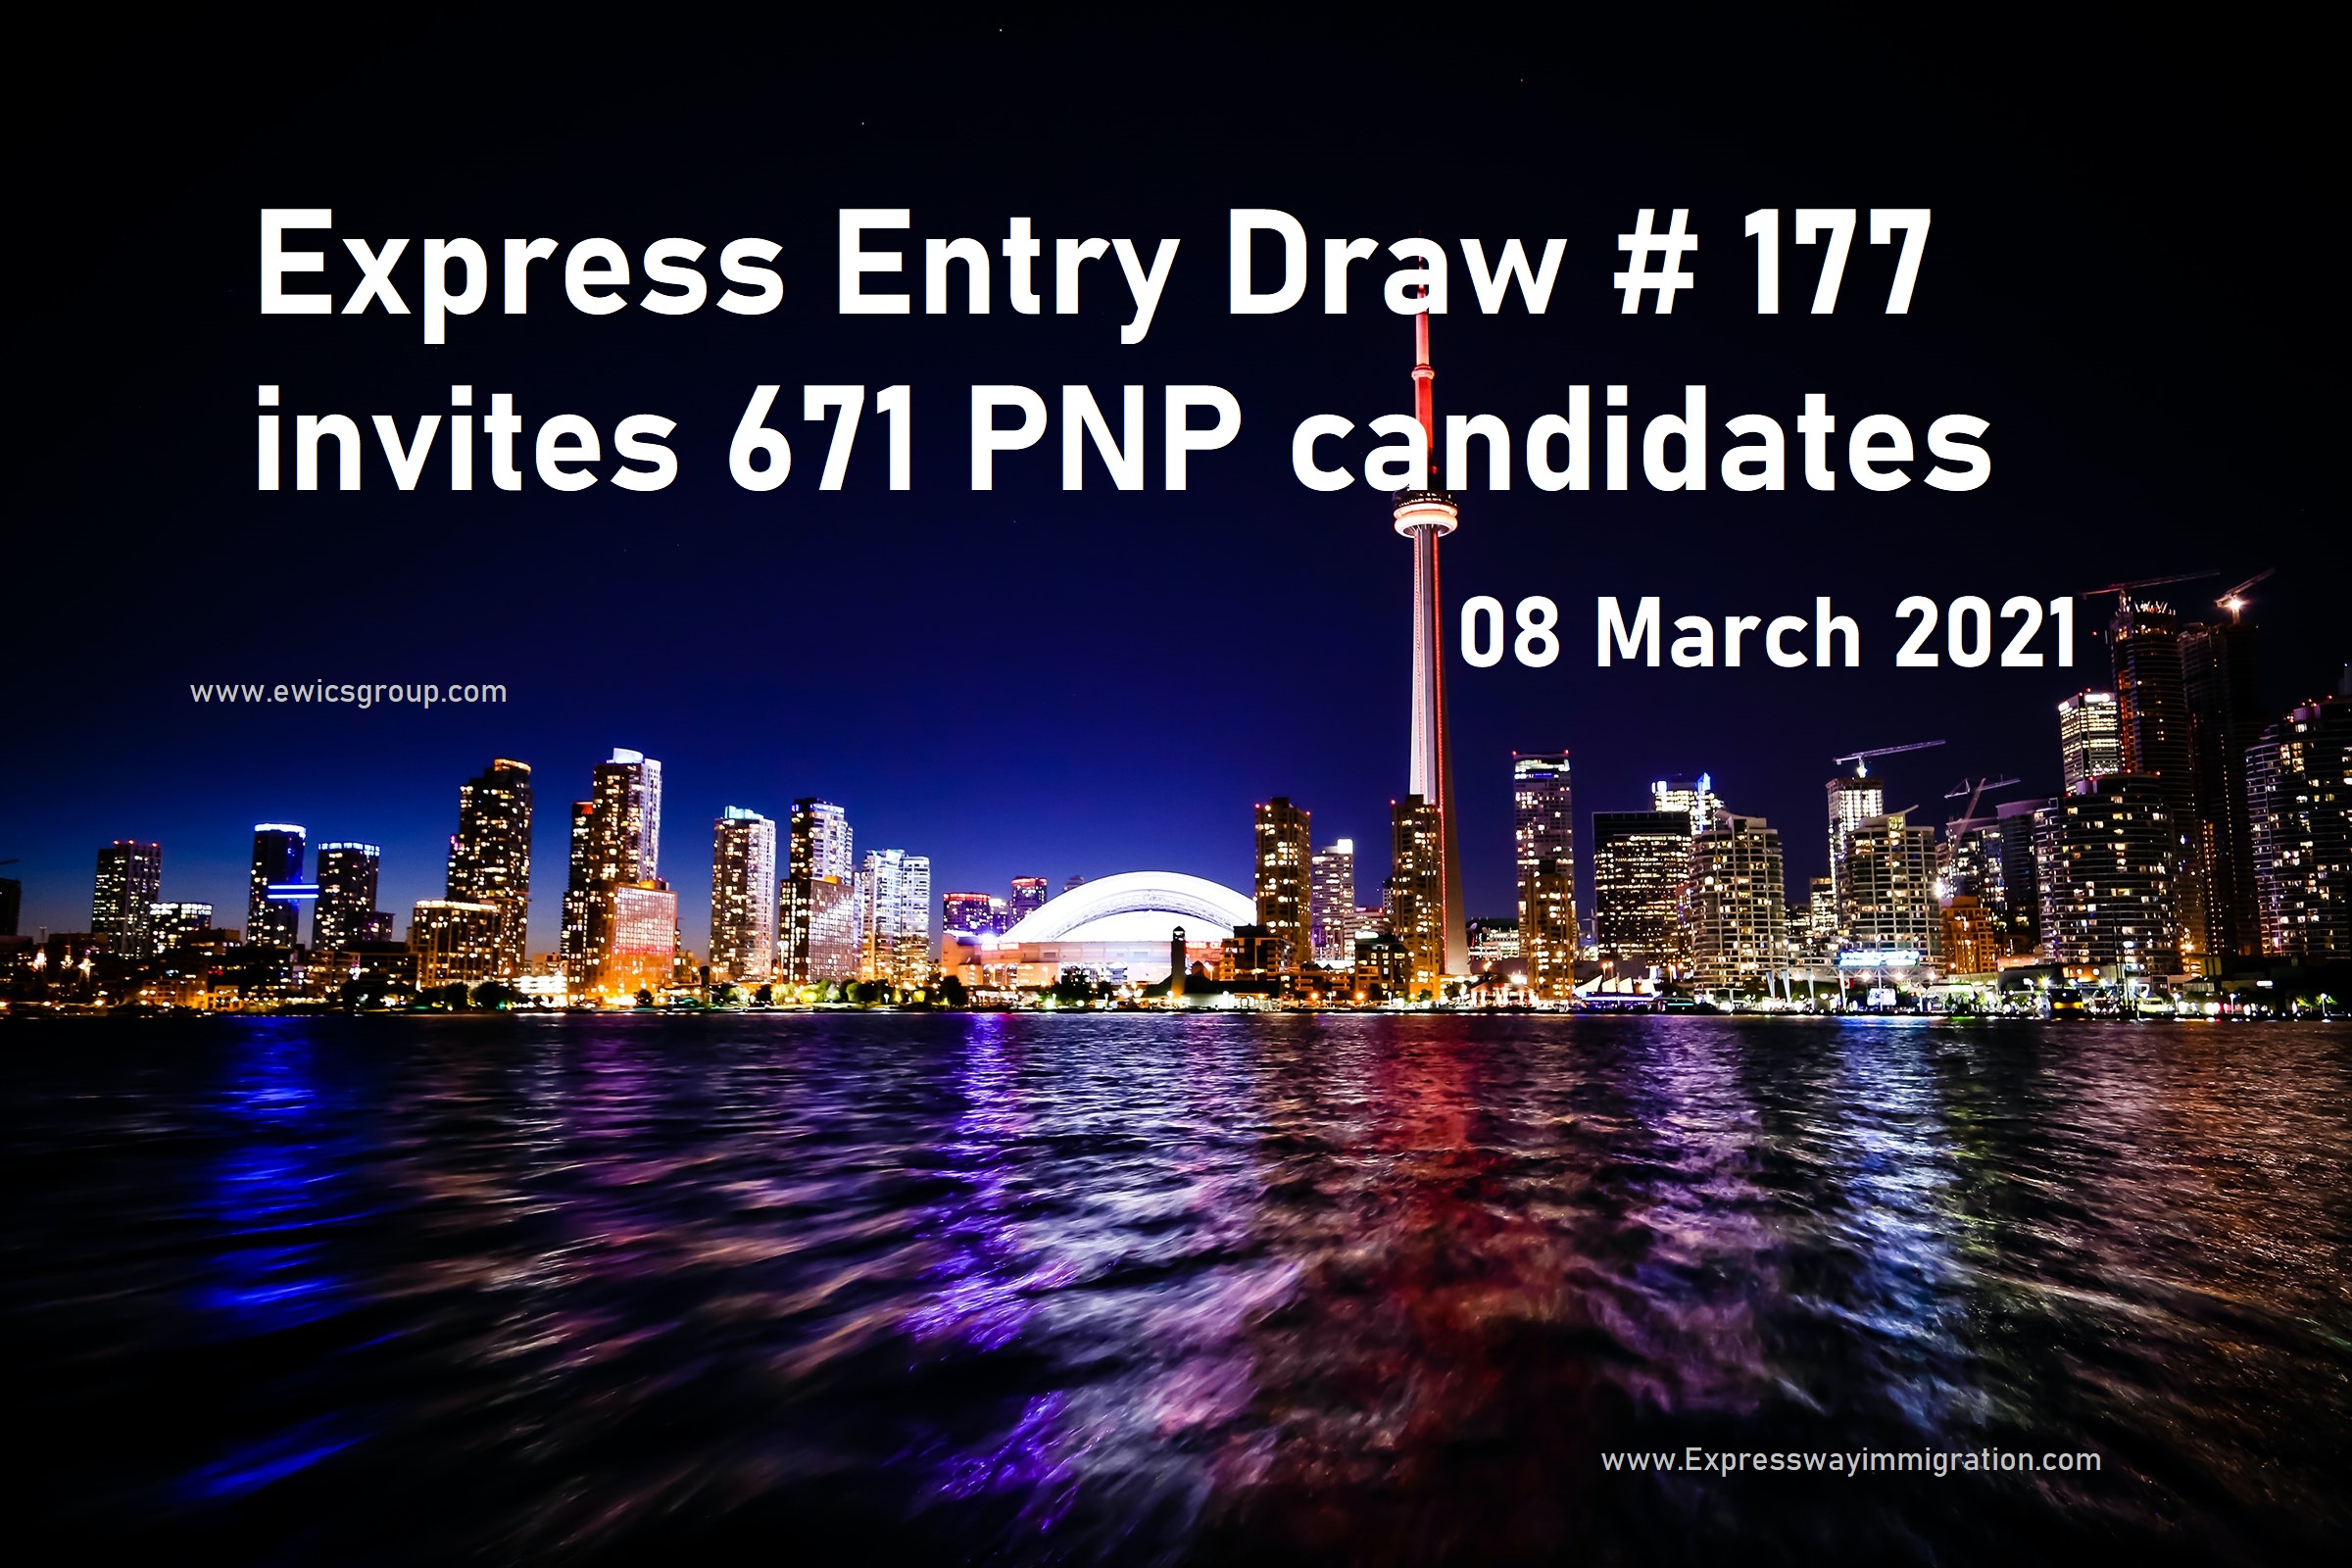 Express Entry Draw #177, Express Entry Draw March 2021, Latest Canada Immigration Draw